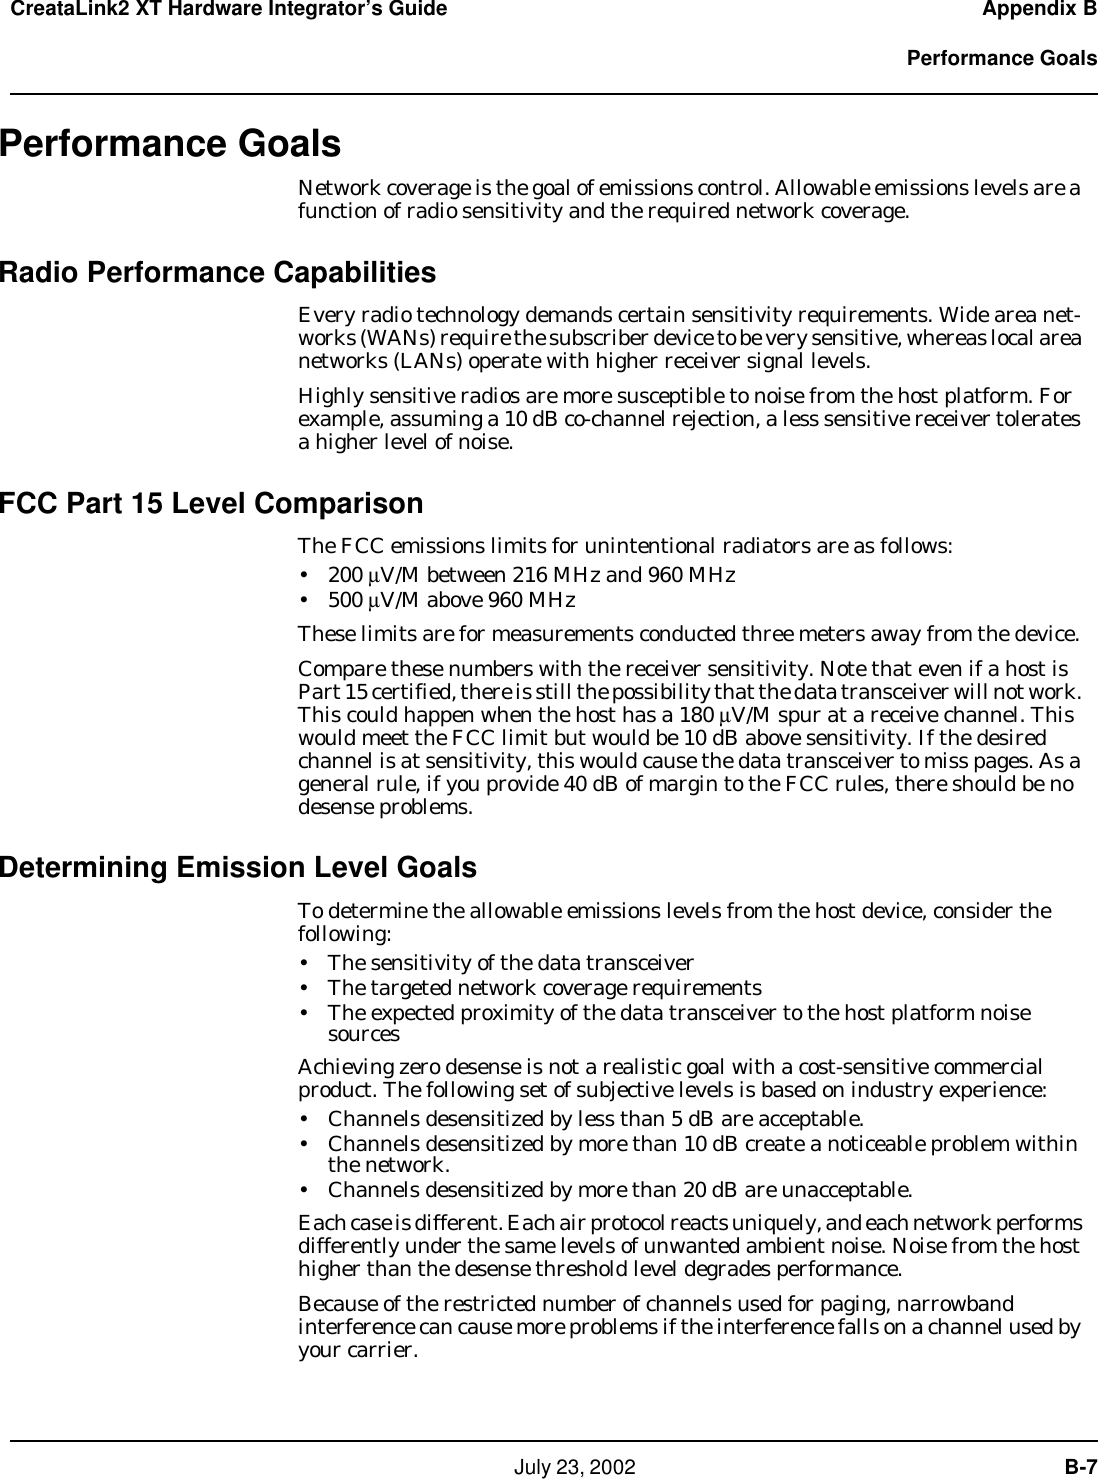   July 23, 2002  B-7CreataLink2 XT Hardware Integrator’s Guide Appendix B  Performance GoalsPerformance GoalsNetwork coverage is the goal of emissions control. Allowable emissions levels are a function of radio sensitivity and the required network coverage. Radio Performance CapabilitiesEvery radio technology demands certain sensitivity requirements. Wide area net-works (WANs) require the subscriber device to be very sensitive, whereas local area networks (LANs) operate with higher receiver signal levels.Highly sensitive radios are more susceptible to noise from the host platform. For example, assuming a 10 dB co-channel rejection, a less sensitive receiver tolerates a higher level of noise.FCC Part 15 Level ComparisonThe FCC emissions limits for unintentional radiators are as follows:• 200 µV/M between 216 MHz and 960 MHz• 500 µV/M above 960 MHzThese limits are for measurements conducted three meters away from the device. Compare these numbers with the receiver sensitivity. Note that even if a host is Part 15 certified, there is still the possibility that the data transceiver will not work. This could happen when the host has a 180 µV/M spur at a receive channel. This would meet the FCC limit but would be 10 dB above sensitivity. If the desired channel is at sensitivity, this would cause the data transceiver to miss pages. As a general rule, if you provide 40 dB of margin to the FCC rules, there should be no desense problems.Determining Emission Level GoalsTo determine the allowable emissions levels from the host device, consider the following:• The sensitivity of the data transceiver • The targeted network coverage requirements• The expected proximity of the data transceiver to the host platform noise sourcesAchieving zero desense is not a realistic goal with a cost-sensitive commercial product. The following set of subjective levels is based on industry experience:• Channels desensitized by less than 5 dB are acceptable.• Channels desensitized by more than 10 dB create a noticeable problem within the network.• Channels desensitized by more than 20 dB are unacceptable.Each case is different. Each air protocol reacts uniquely, and each network performs differently under the same levels of unwanted ambient noise. Noise from the host higher than the desense threshold level degrades performance. Because of the restricted number of channels used for paging, narrowband  interference can cause more problems if the interference falls on a channel used by your carrier.